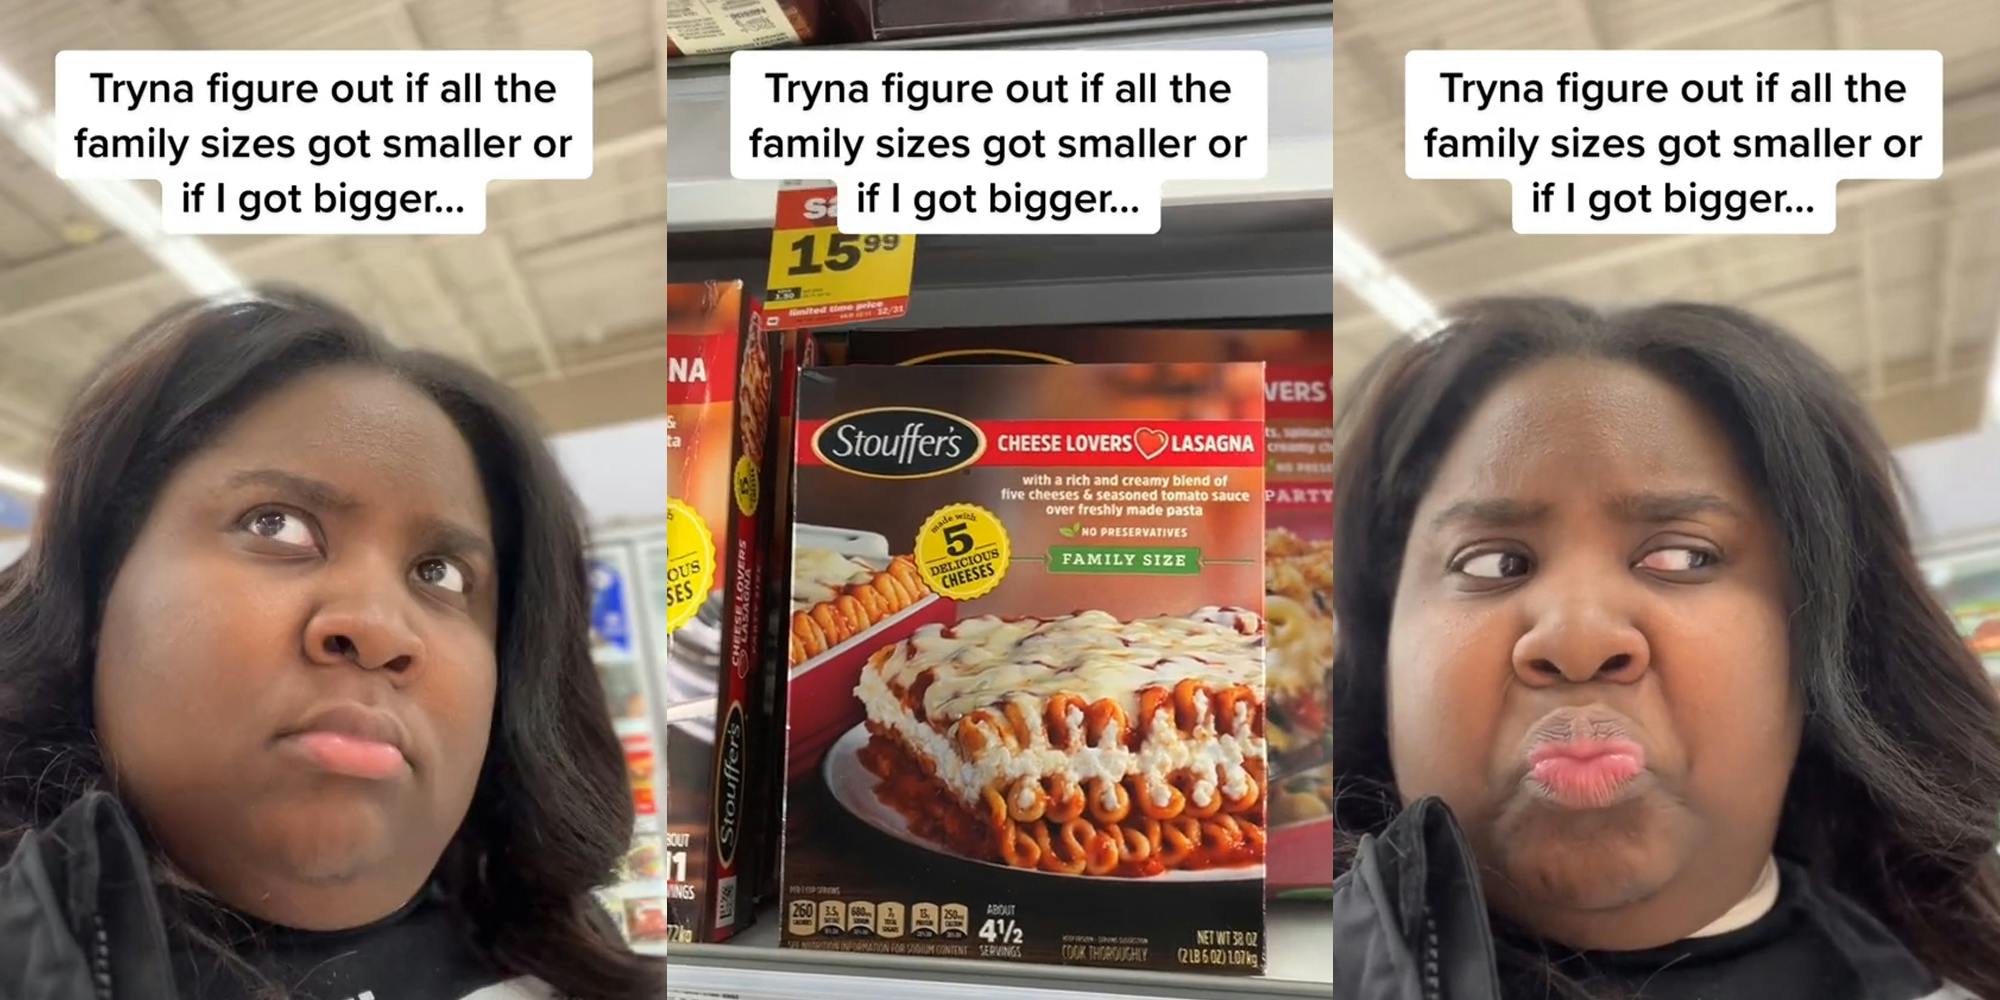 woman in store with caption "Tryna figure out if all the family sizes got smaller or if I got bigger..." (l) Stouffer's Cheese Lover's Lasagna Family Size in freezer at store with caption "Tryna figure out if all the family sizes got smaller or if I got bigger..." (c) woman in store with caption "Tryna figure out if all the family sizes got smaller or if I got bigger..." (r)